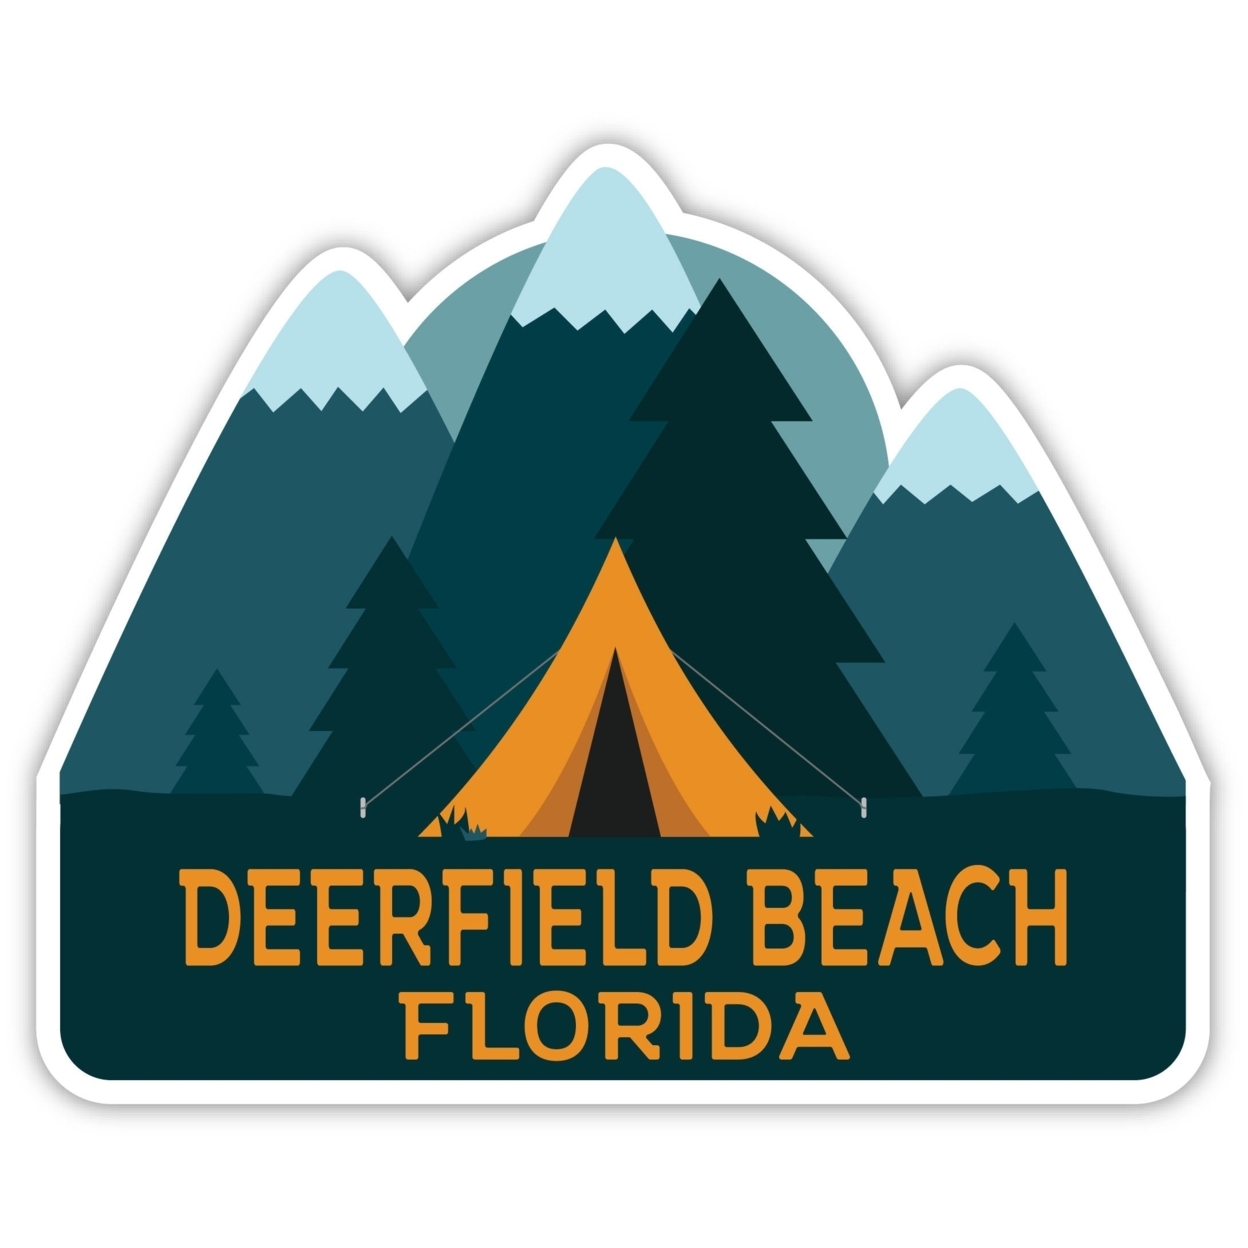 Deerfield Beach Florida Souvenir Decorative Stickers (Choose Theme And Size) - 4-Pack, 6-Inch, Tent